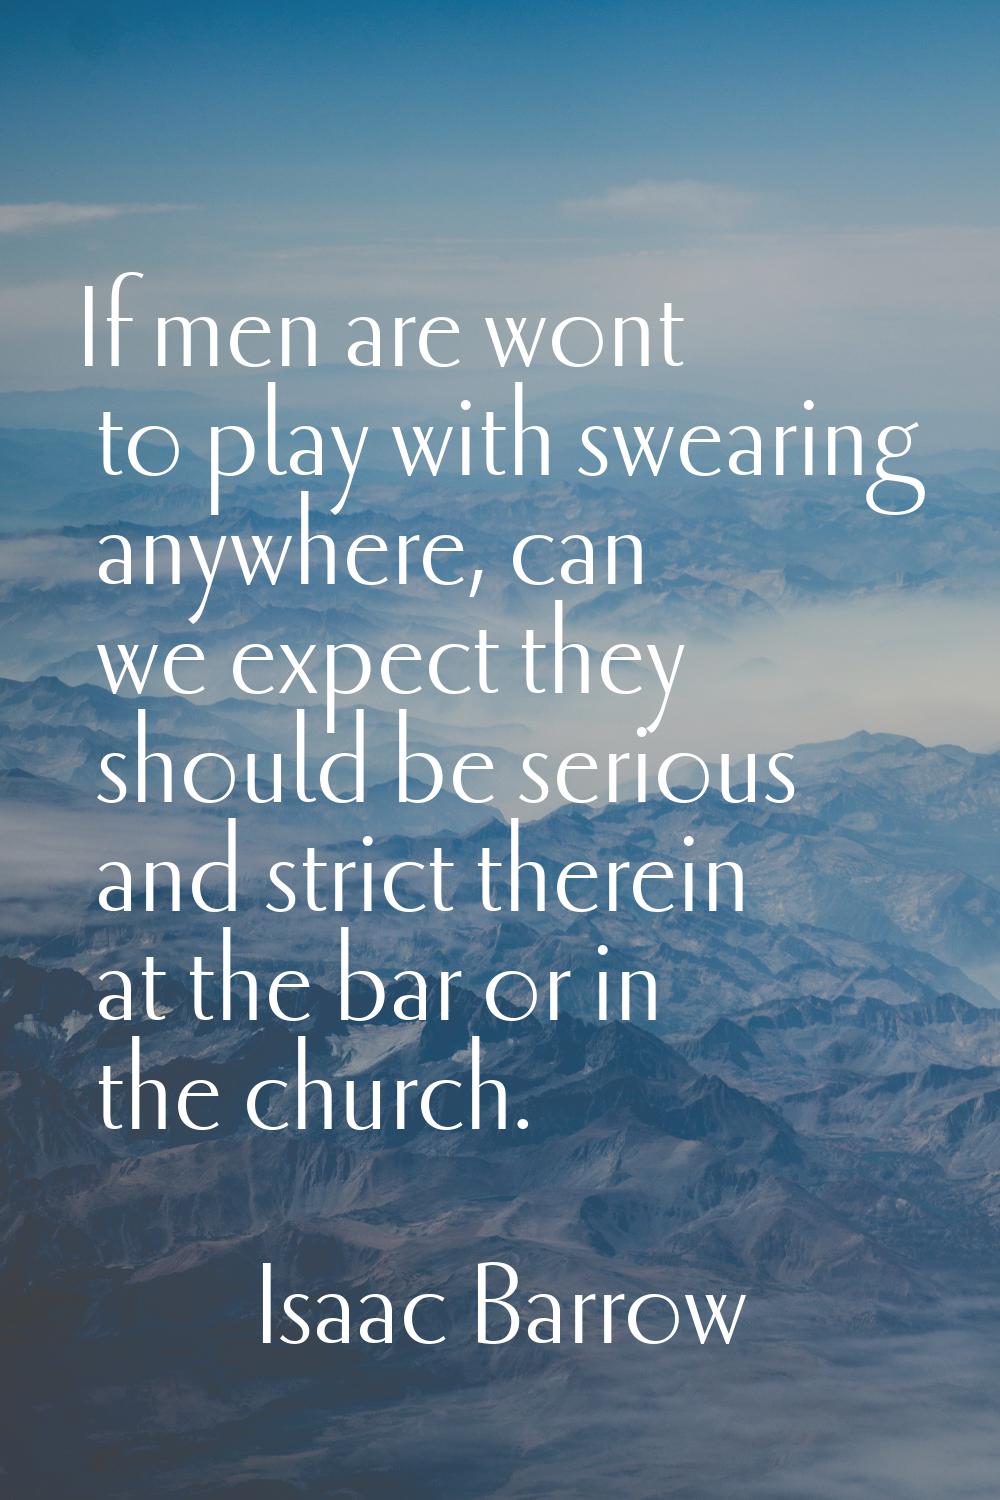 If men are wont to play with swearing anywhere, can we expect they should be serious and strict the